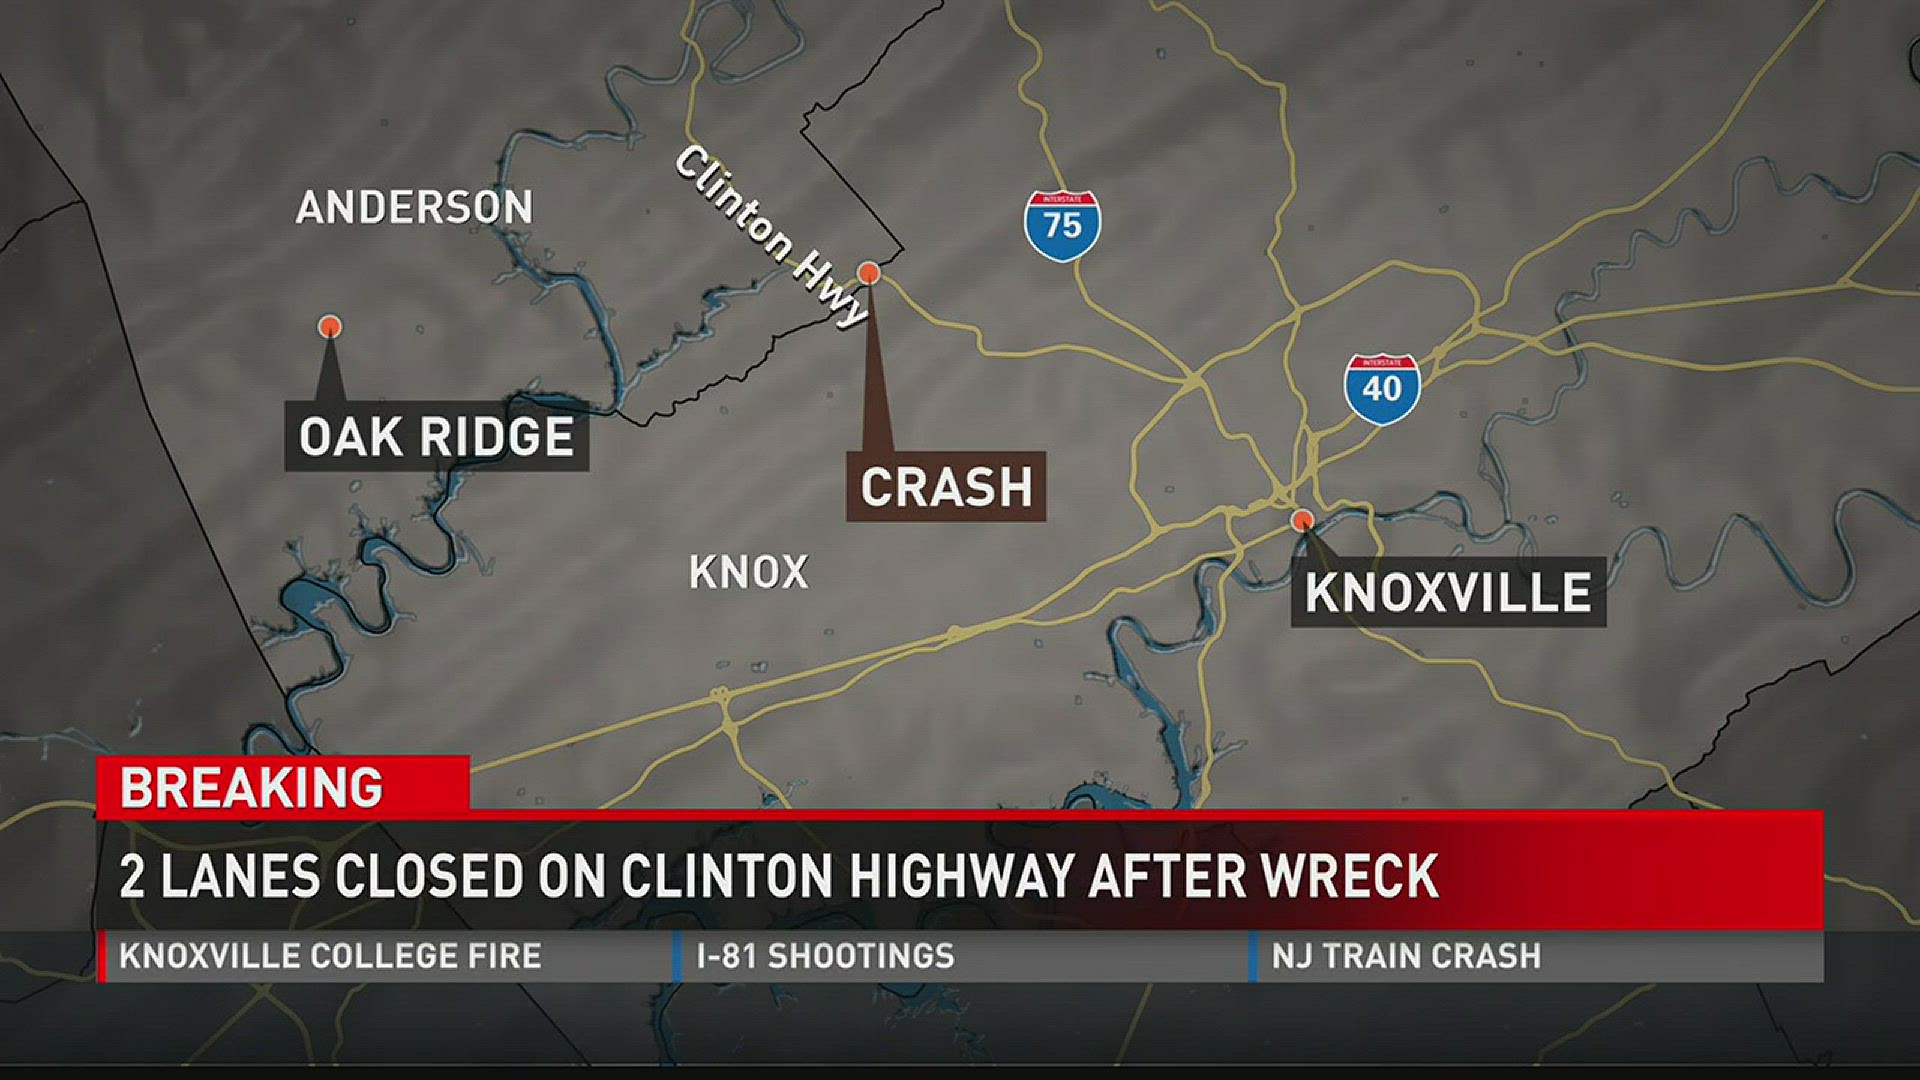 Crews are responding to a Friday wreck on Clinton Highway near the county line between Knox and Anderson counties.